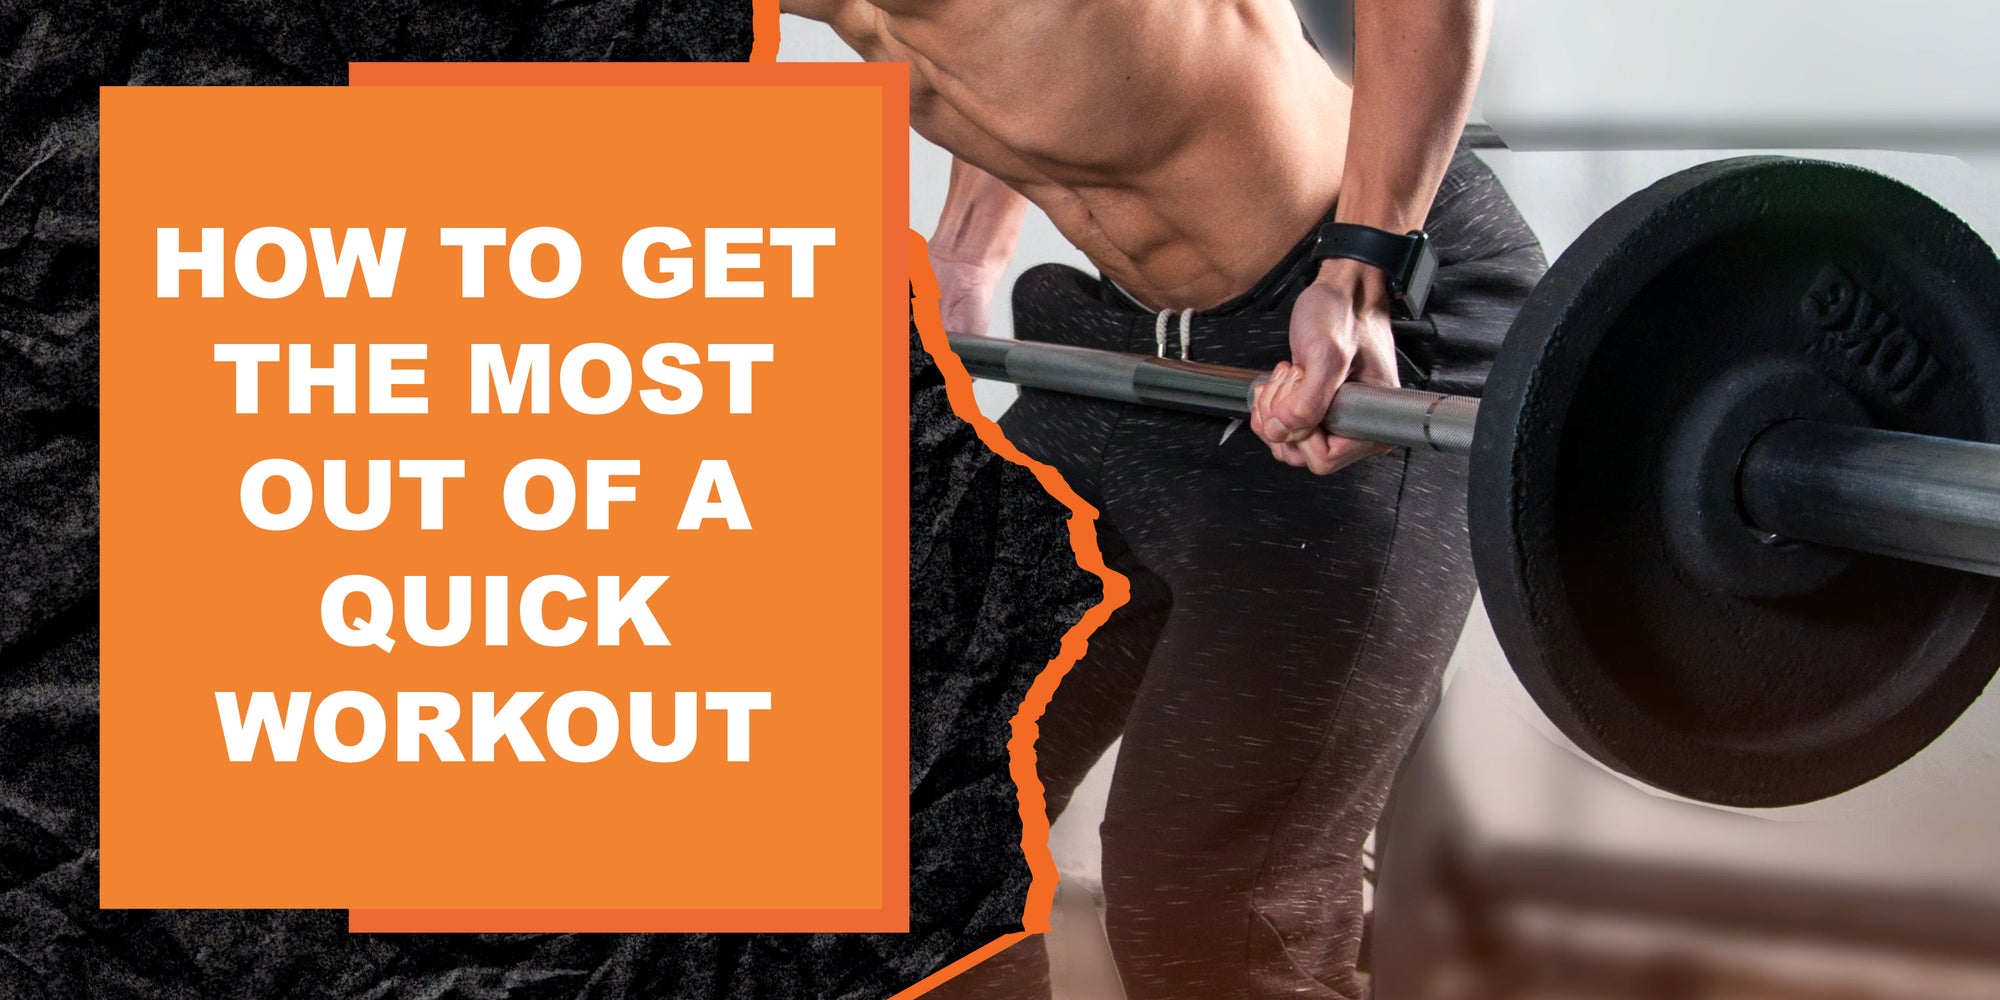 How to Get the Most Out of a Quick Workout